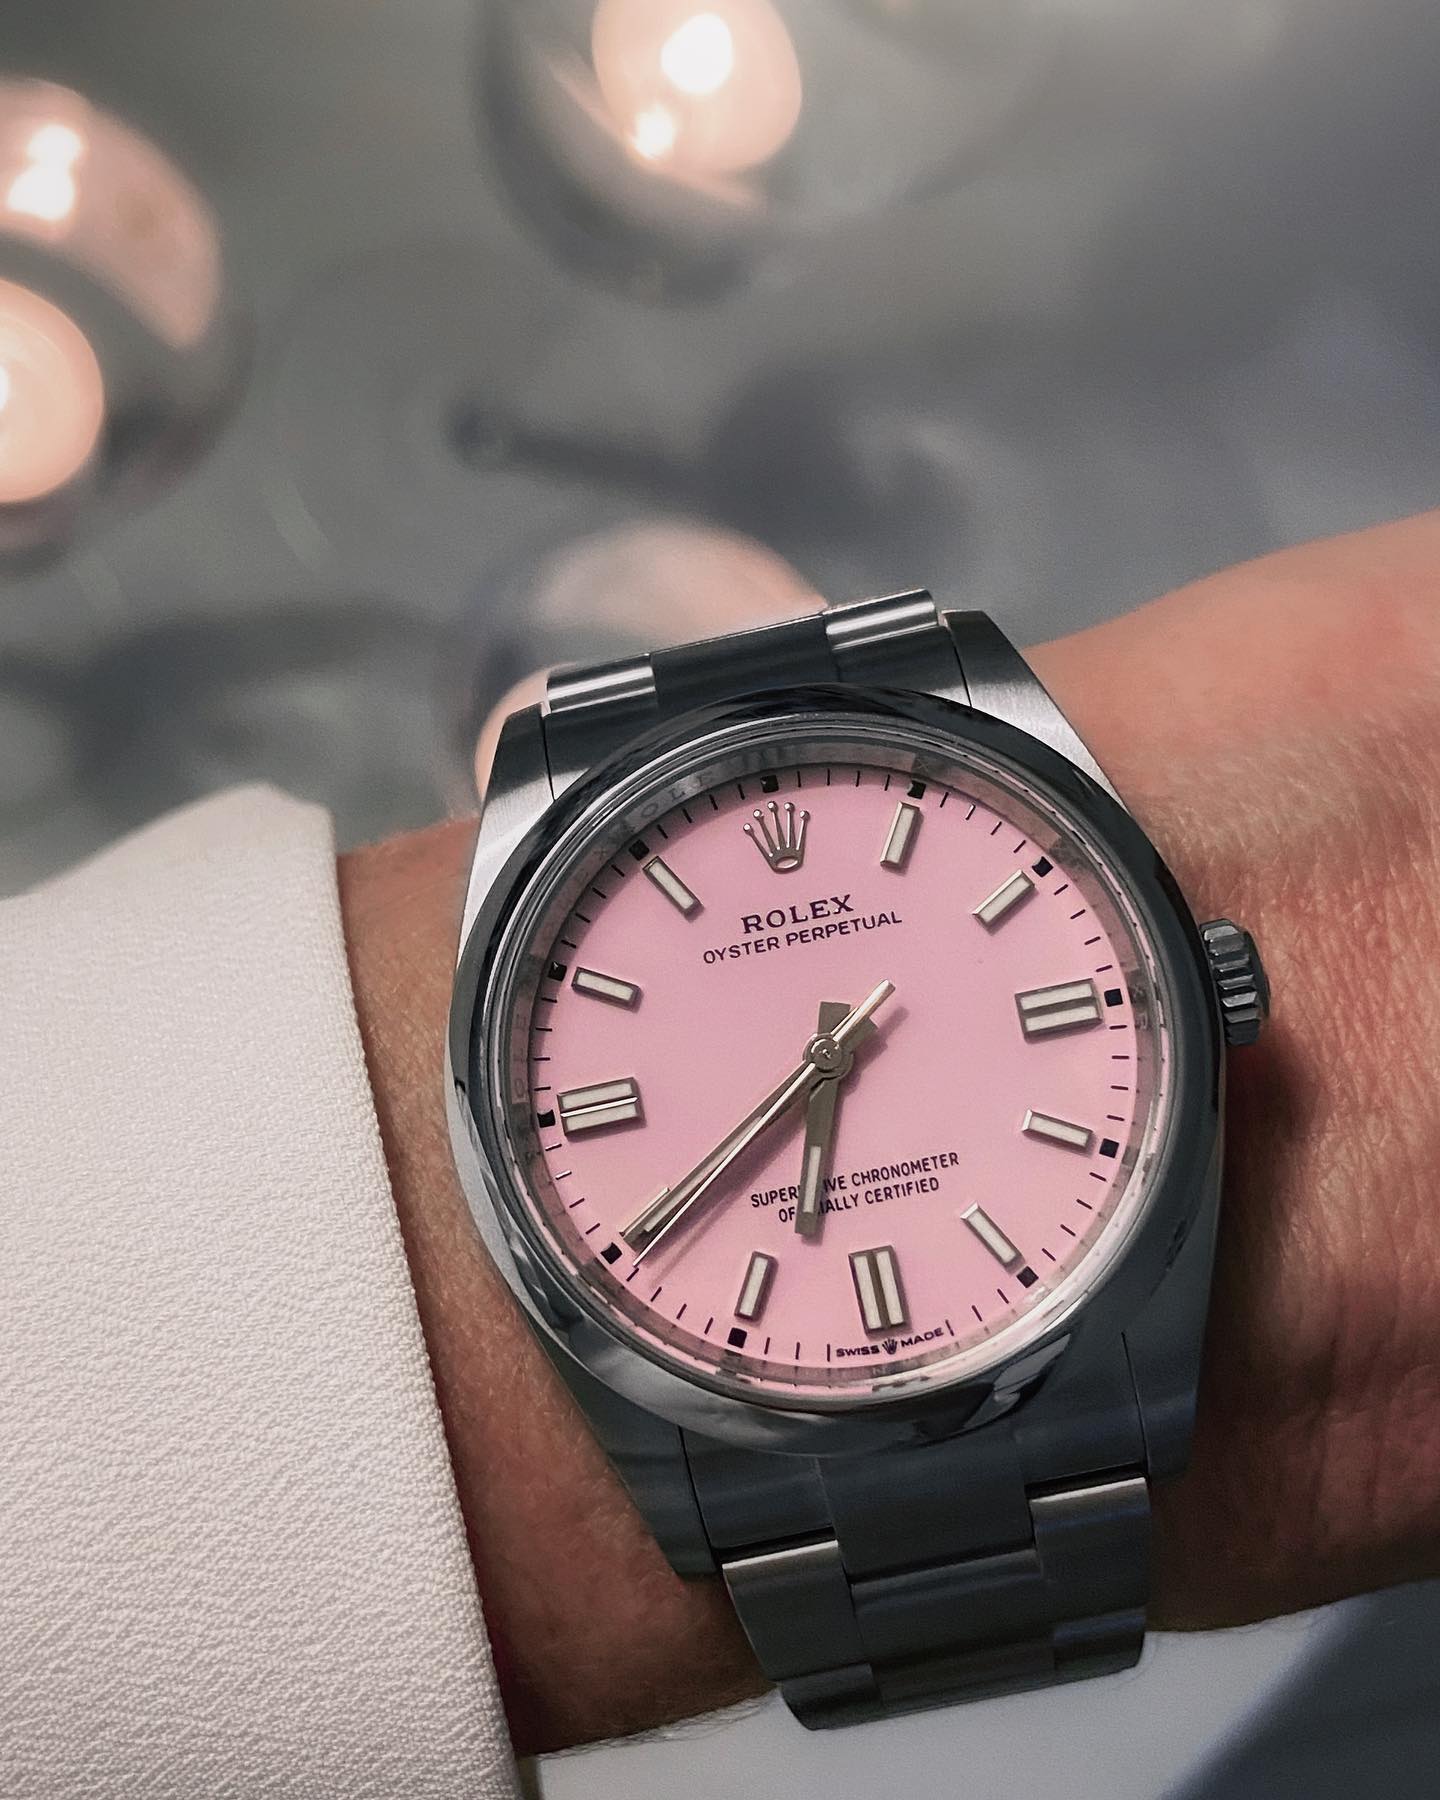 Candy Pink Friday 🍭 perfect look for the weekend 🥂Rolex Oyster Perpetual 36 mm 🌸 Pure Love 🌸
#oysterperpetualpinkdial #rolex #oysterperpetual #oysterperpetual36 #candypink #oysterperpetualcandypink